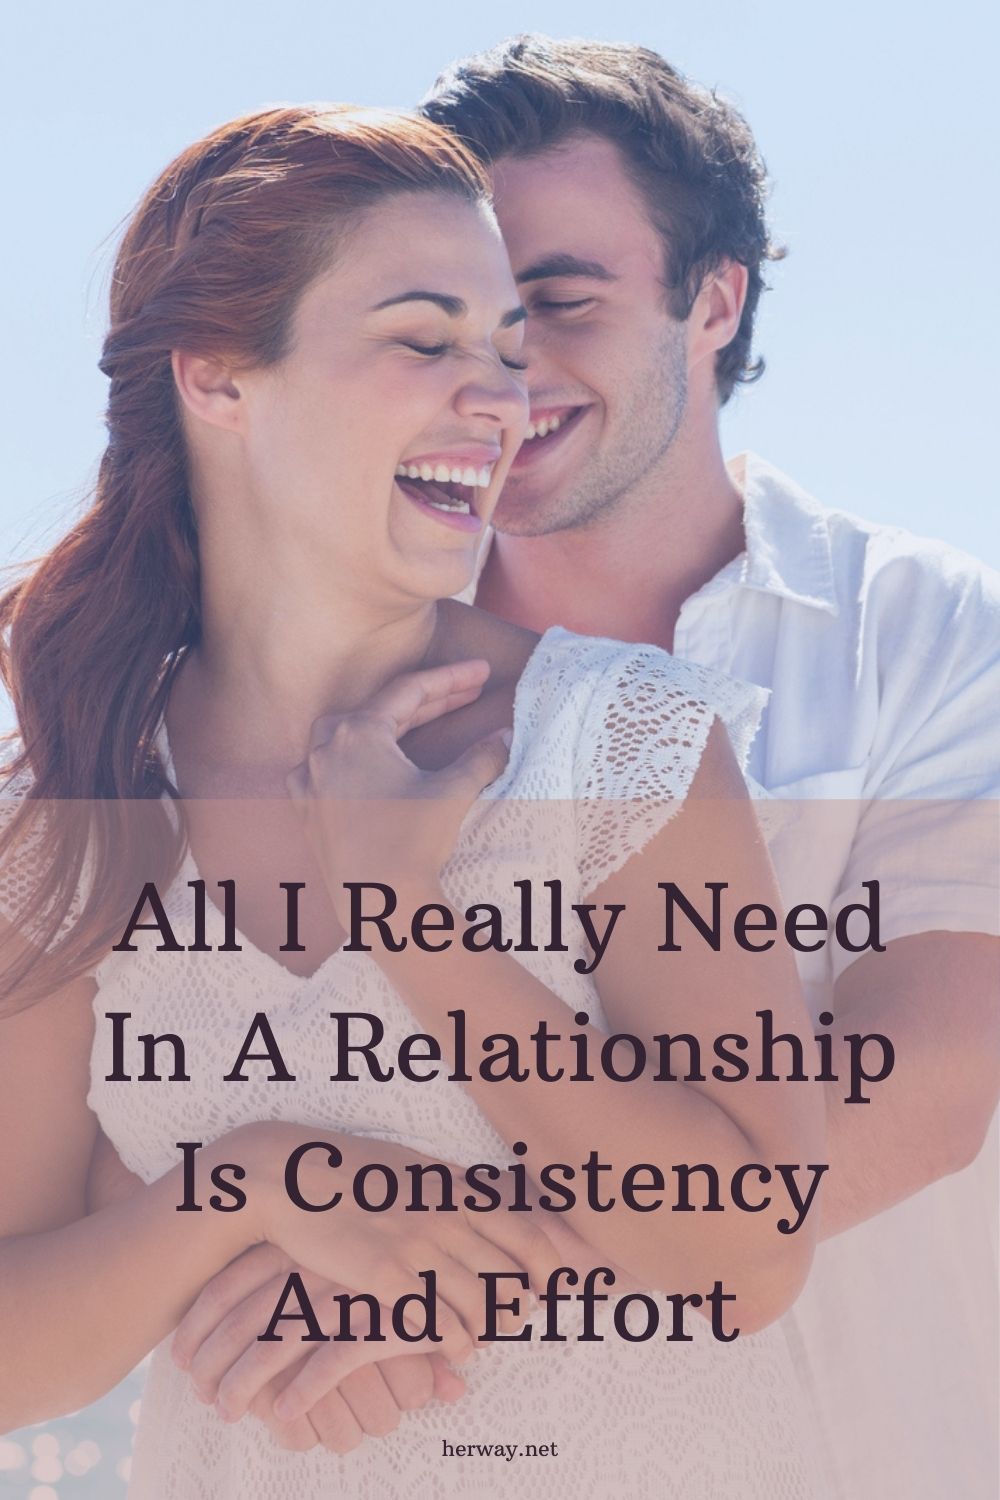 All I Really Need In A Relationship Is Consistency And Effort